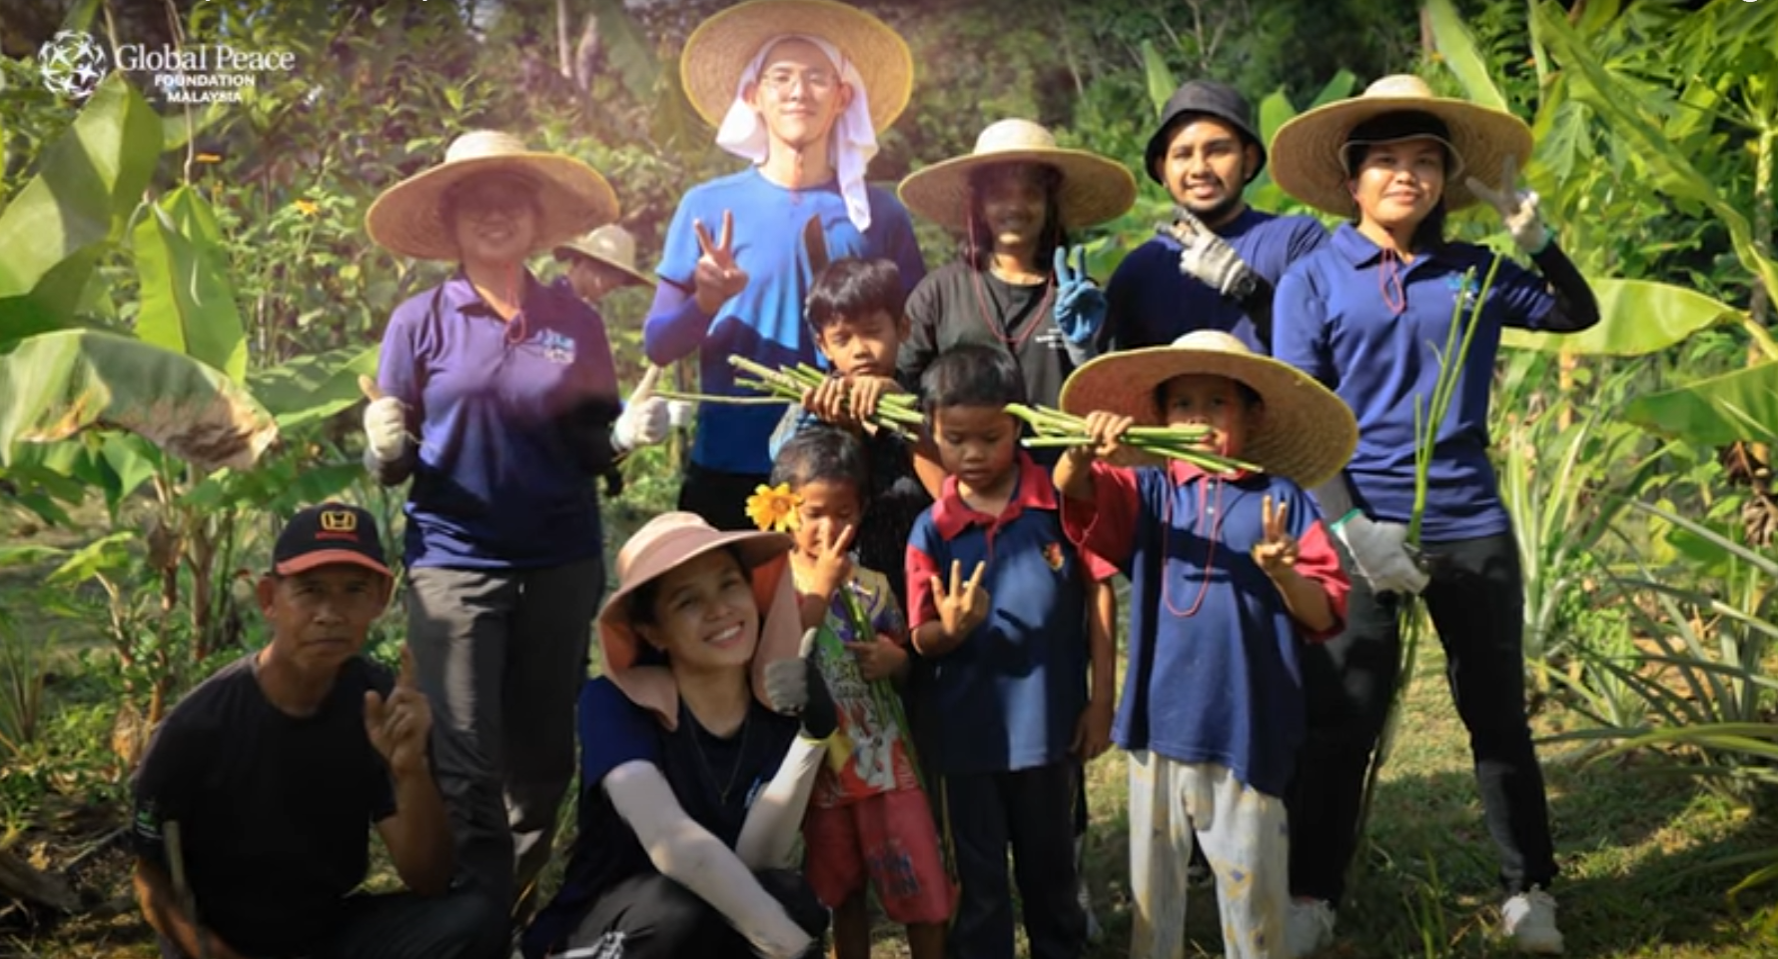 A group of people in Malaysia wearing hats and posing for a photo, capturing "Our Story" in a video.